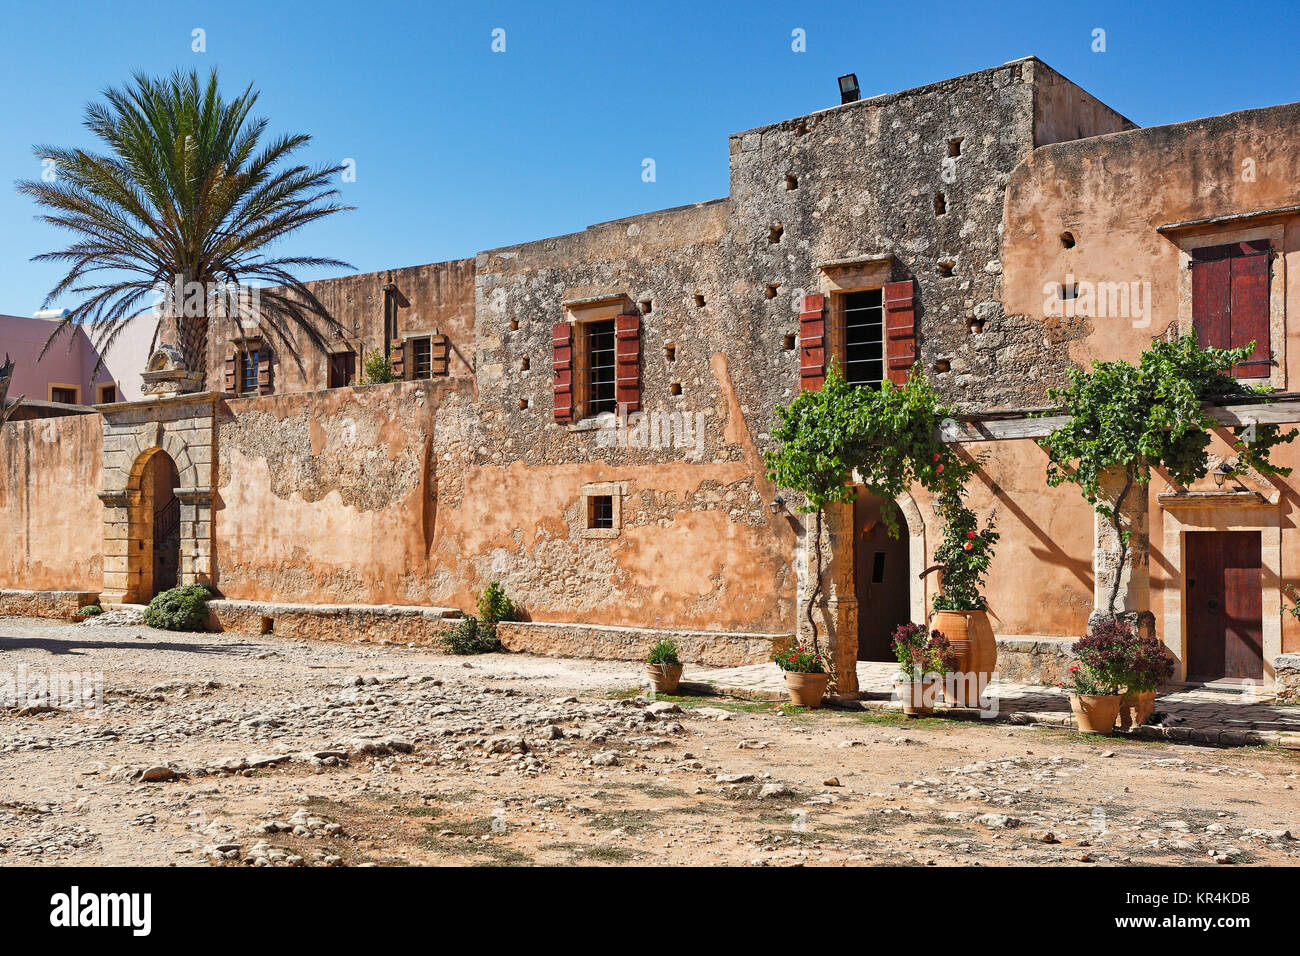 The Arkadi Monastery was built in 1587 on the island of Crete, Greece Stock Photo